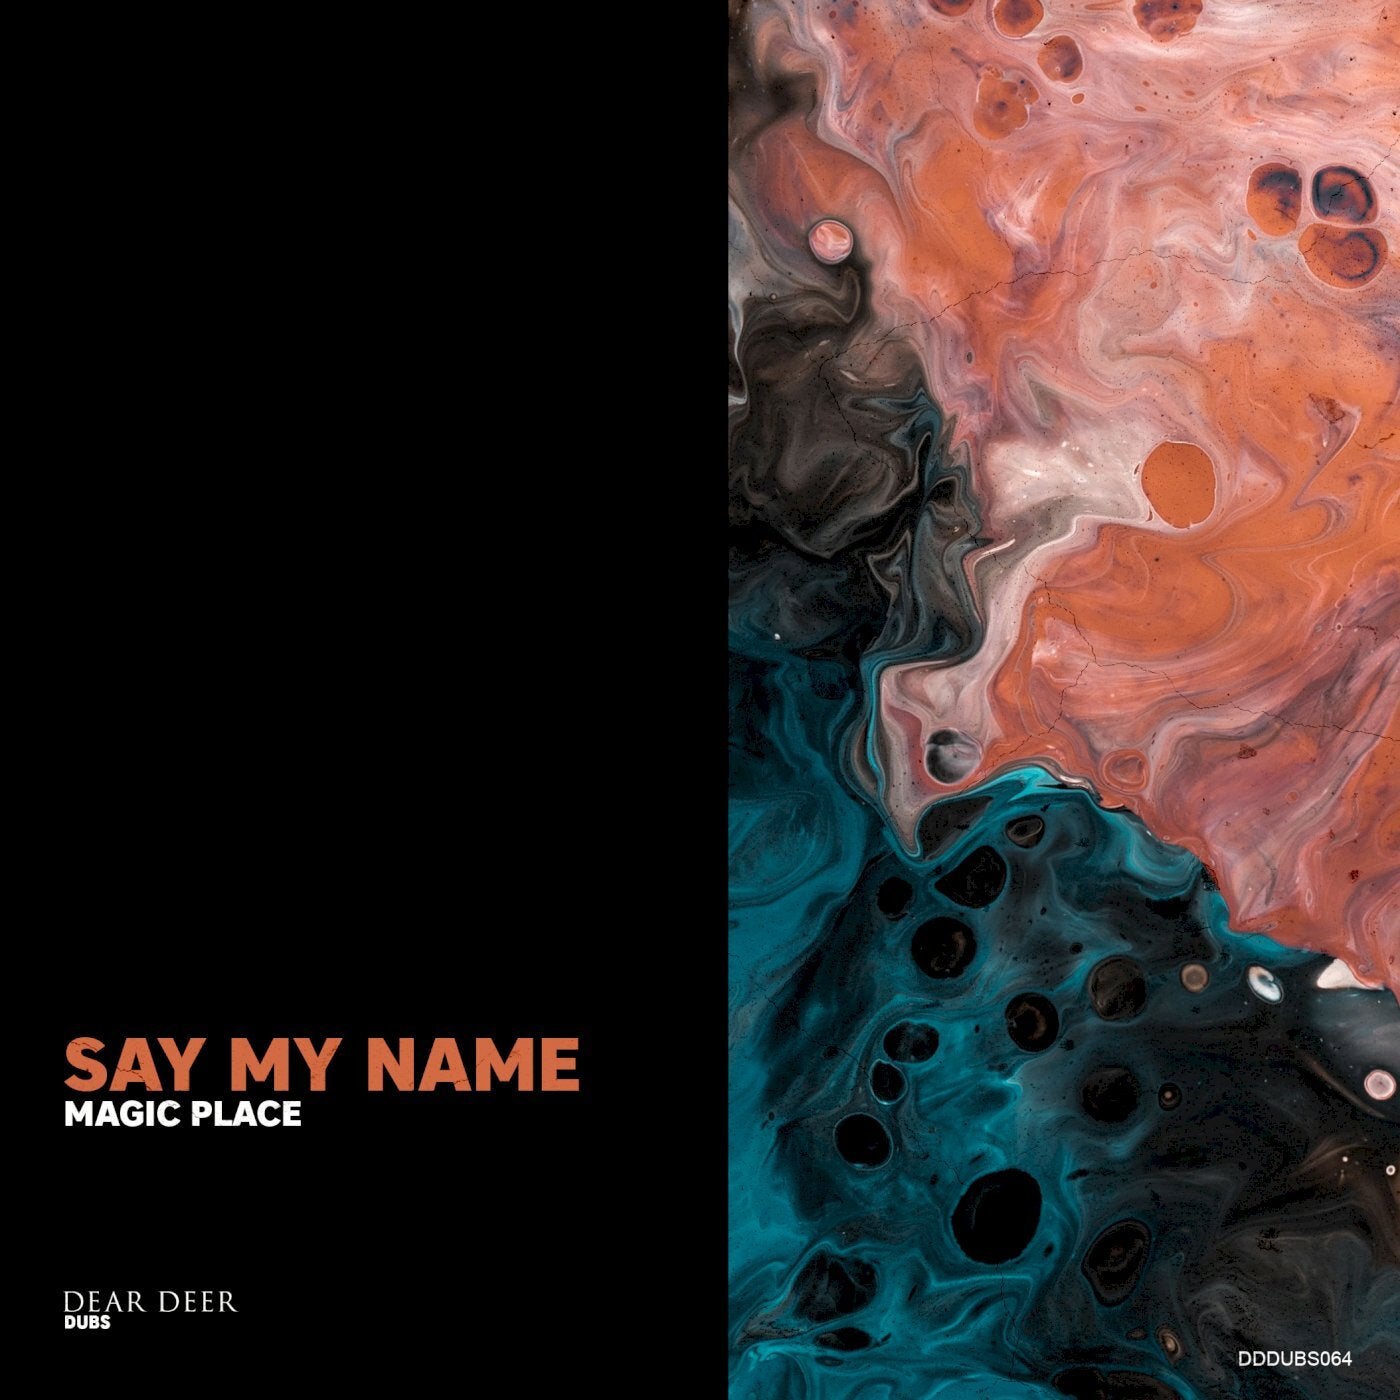 image cover: SevenEver, Magic Place - Say My Name / DDDUBS064